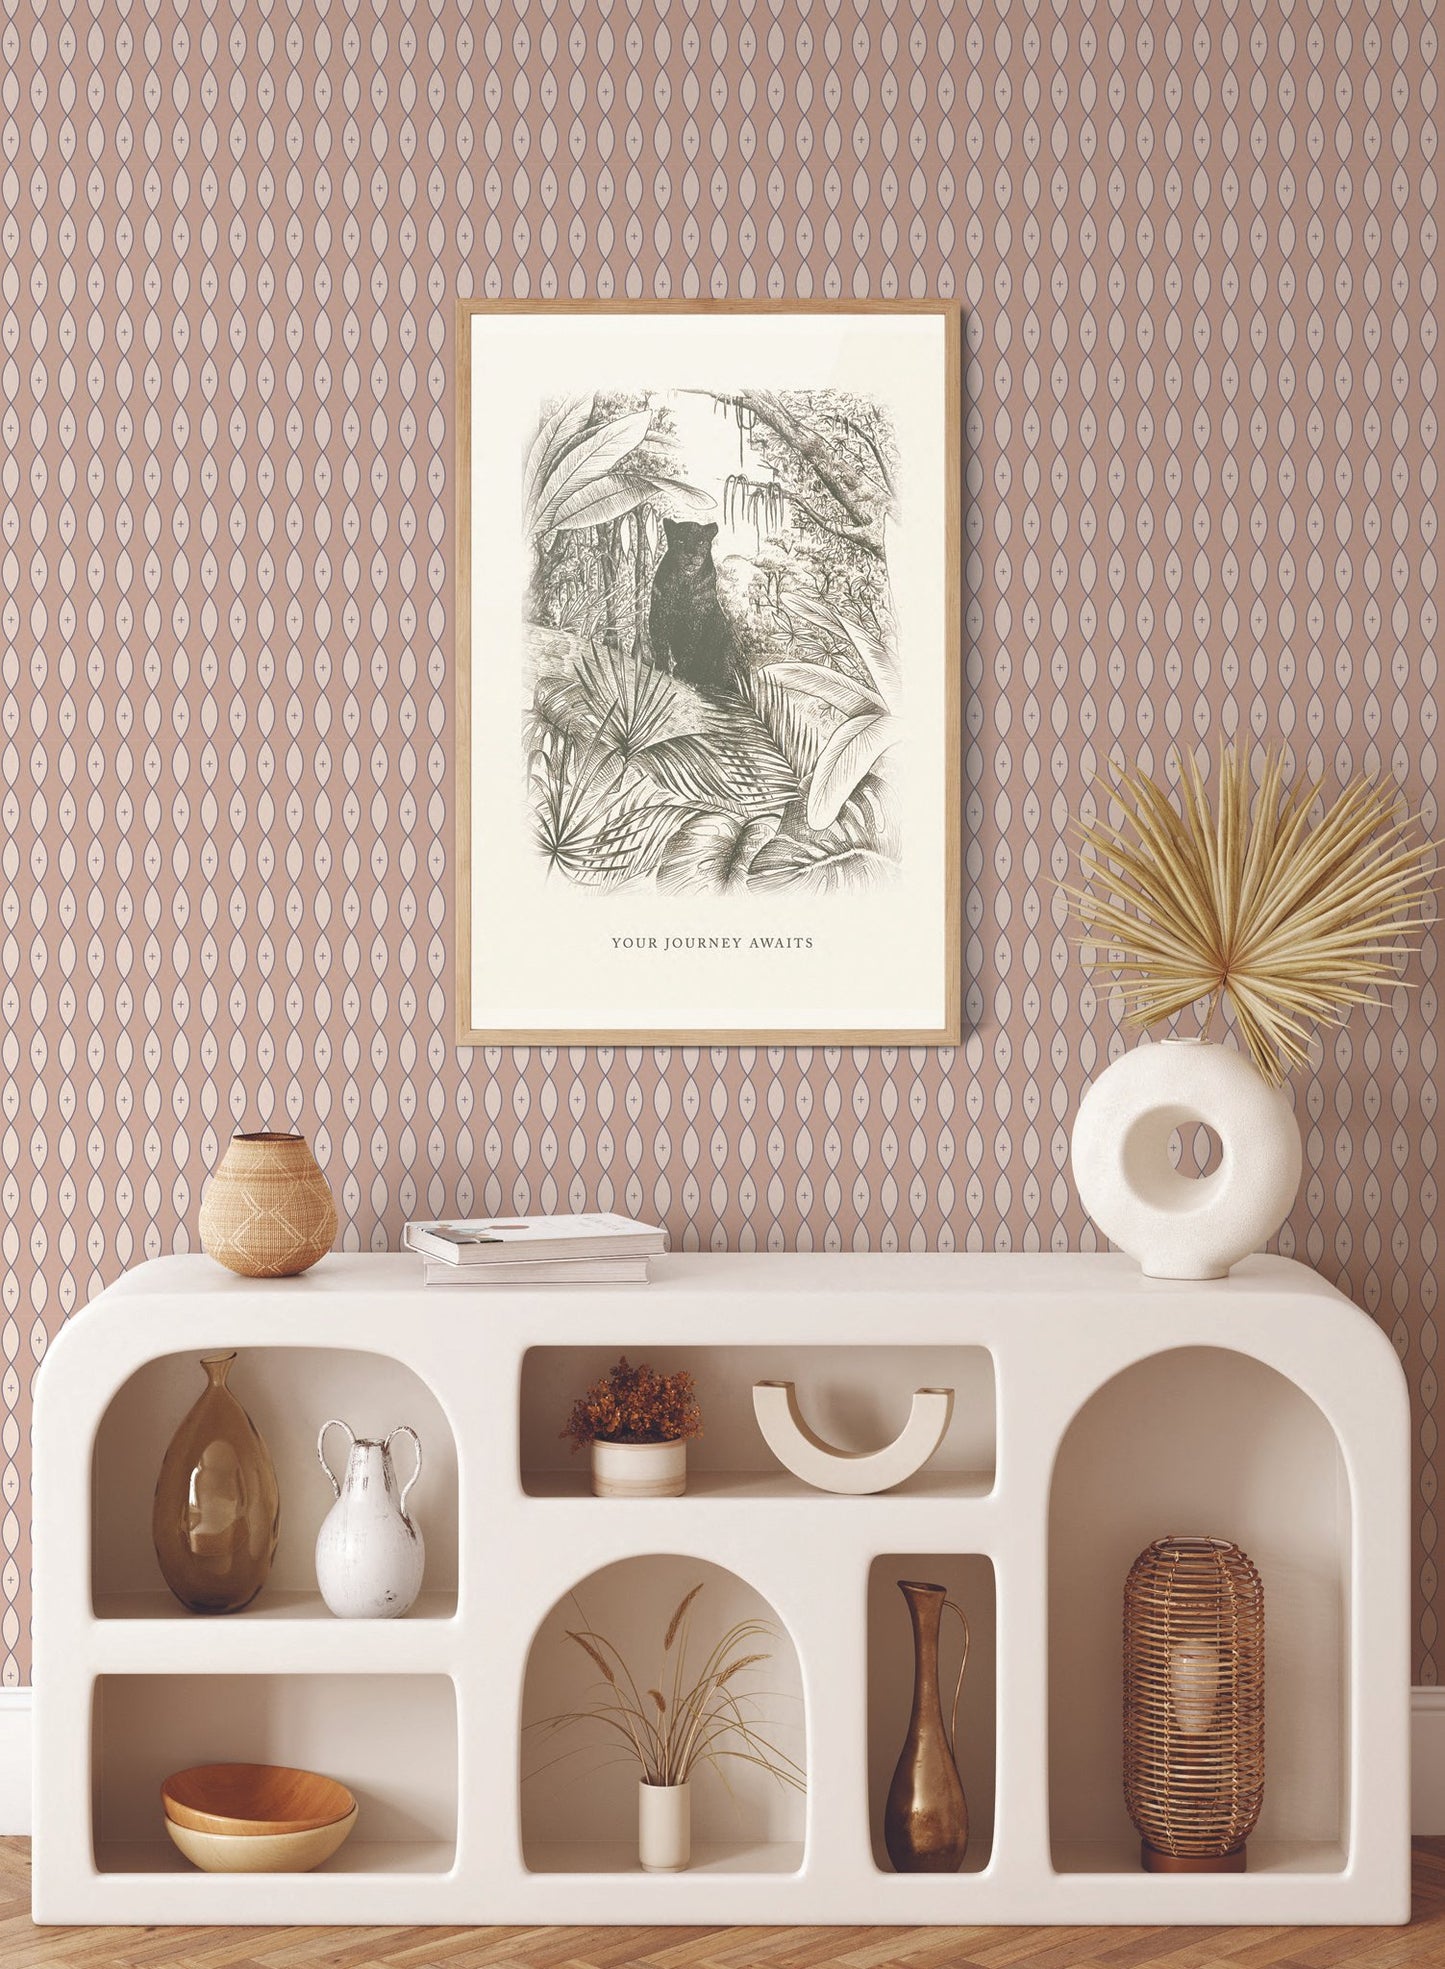 Idyll is a minimalist wallpaper by Opposite Wall of vertical garlands of pointed oval shapes.